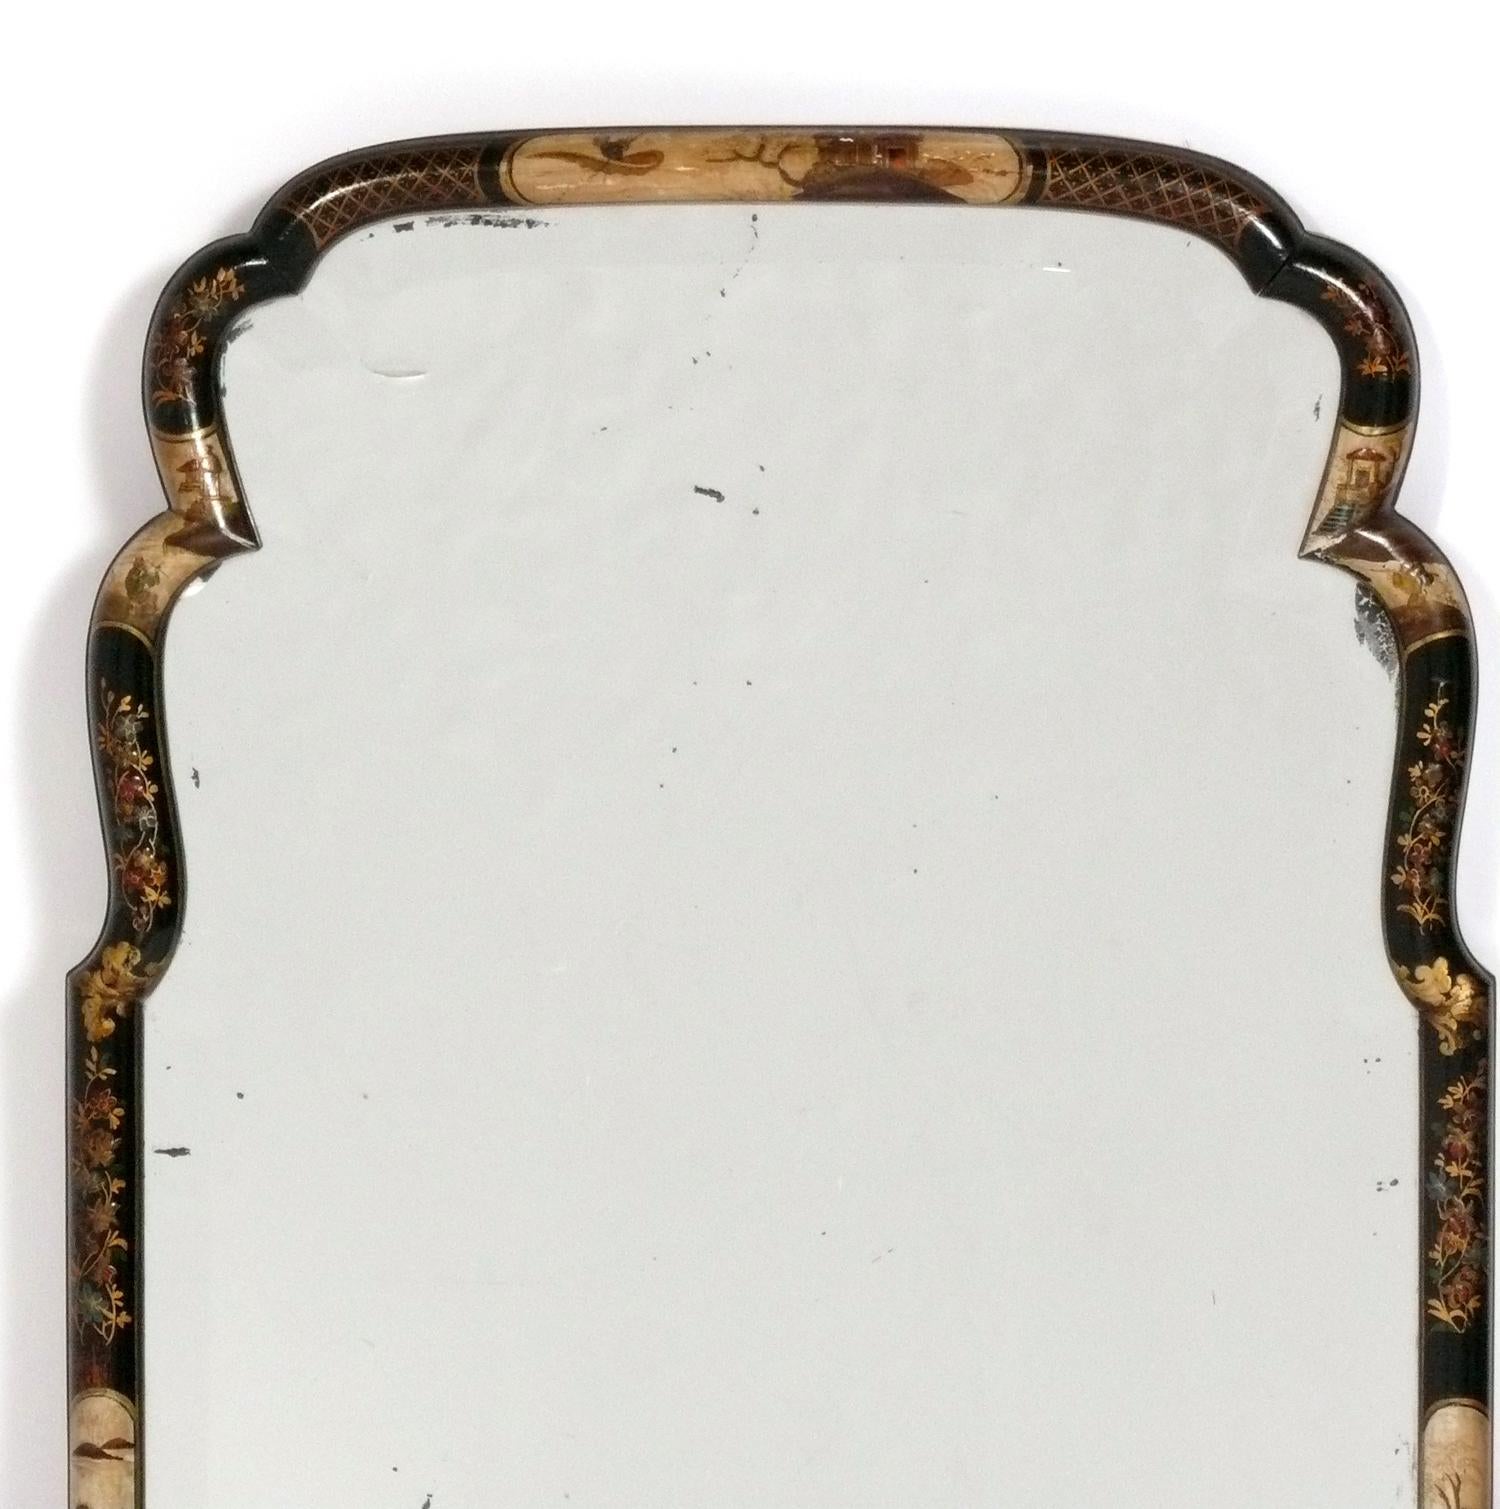 Selection of 19th century chinoiserie Mirrors, China, circa 19th century. They are priced at $1800 each, or $3000 for the pair. They each feature wonderful hand painted chinoiserie decoration. The larger mirror measures 30